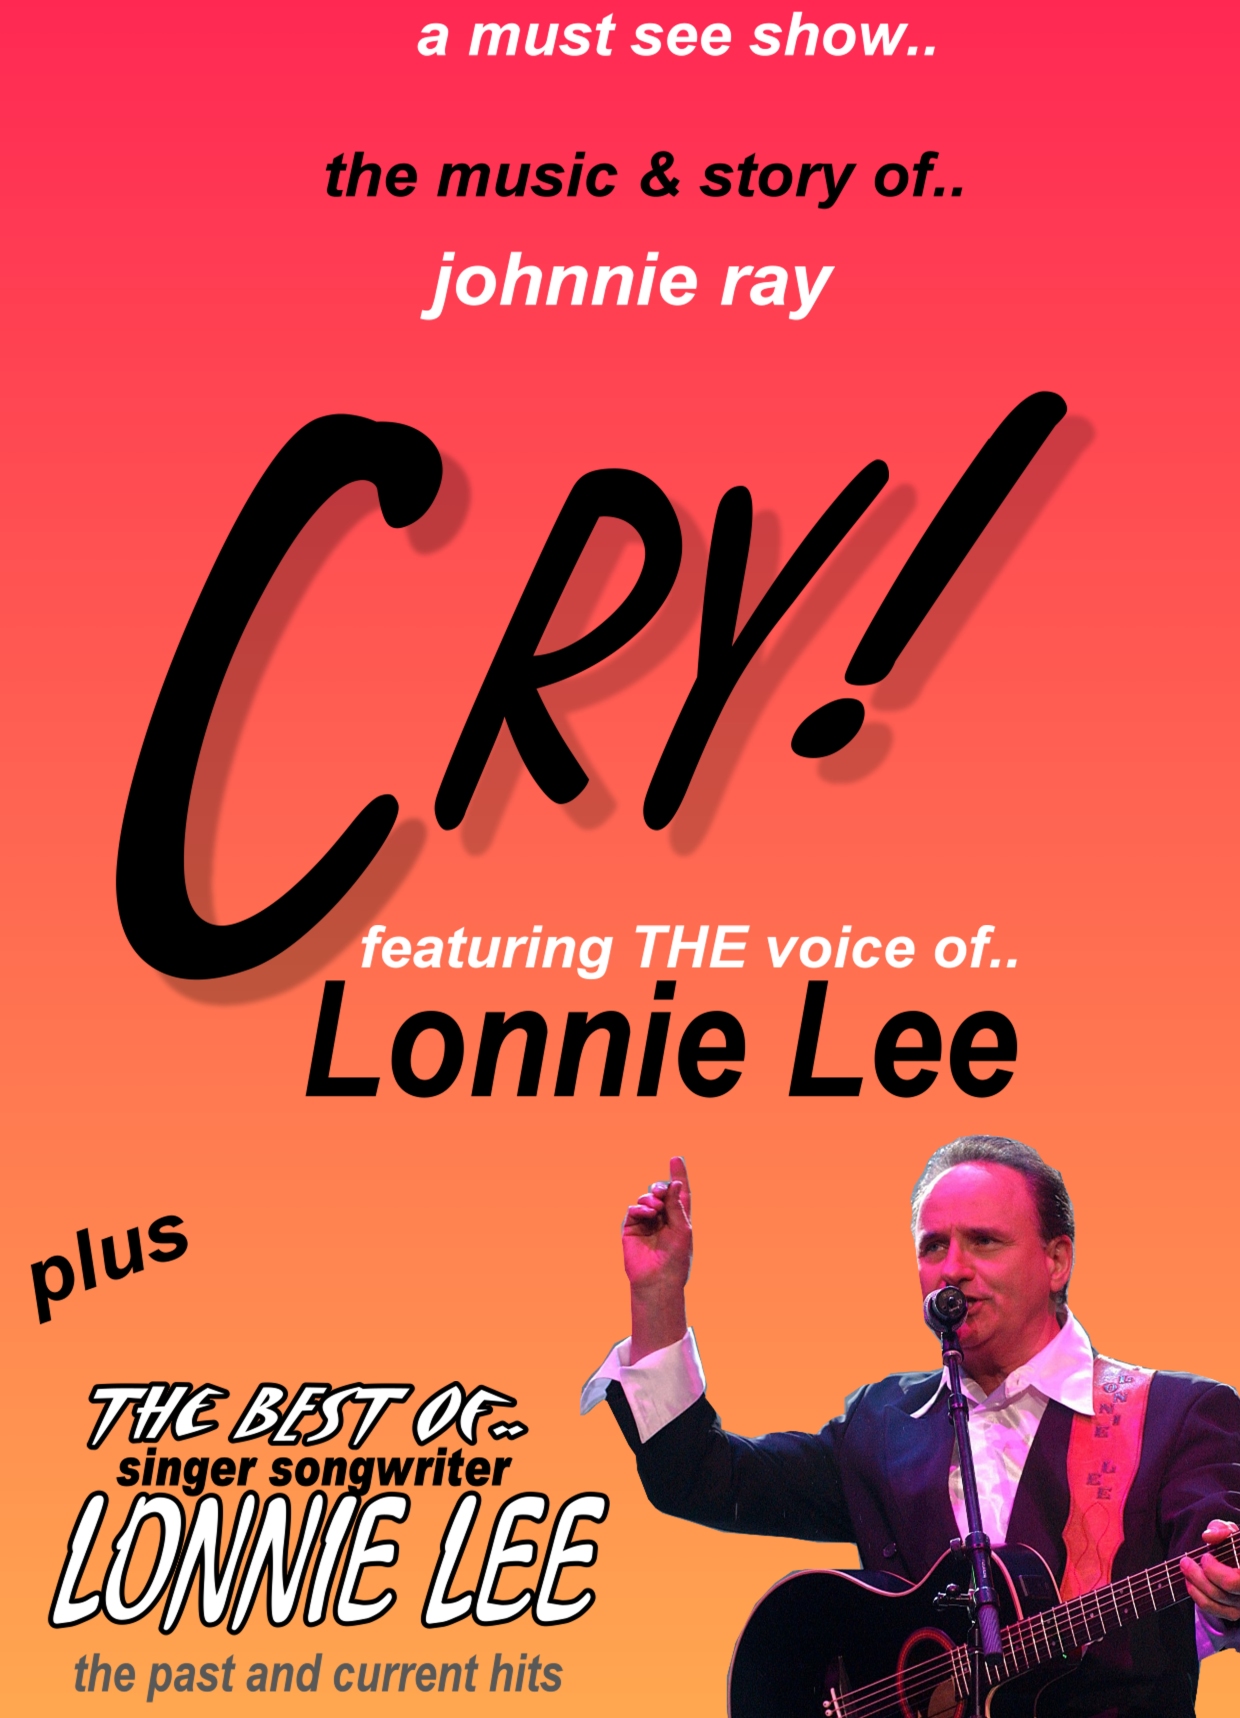 Lonnie Lee CRY Show sings I Believe